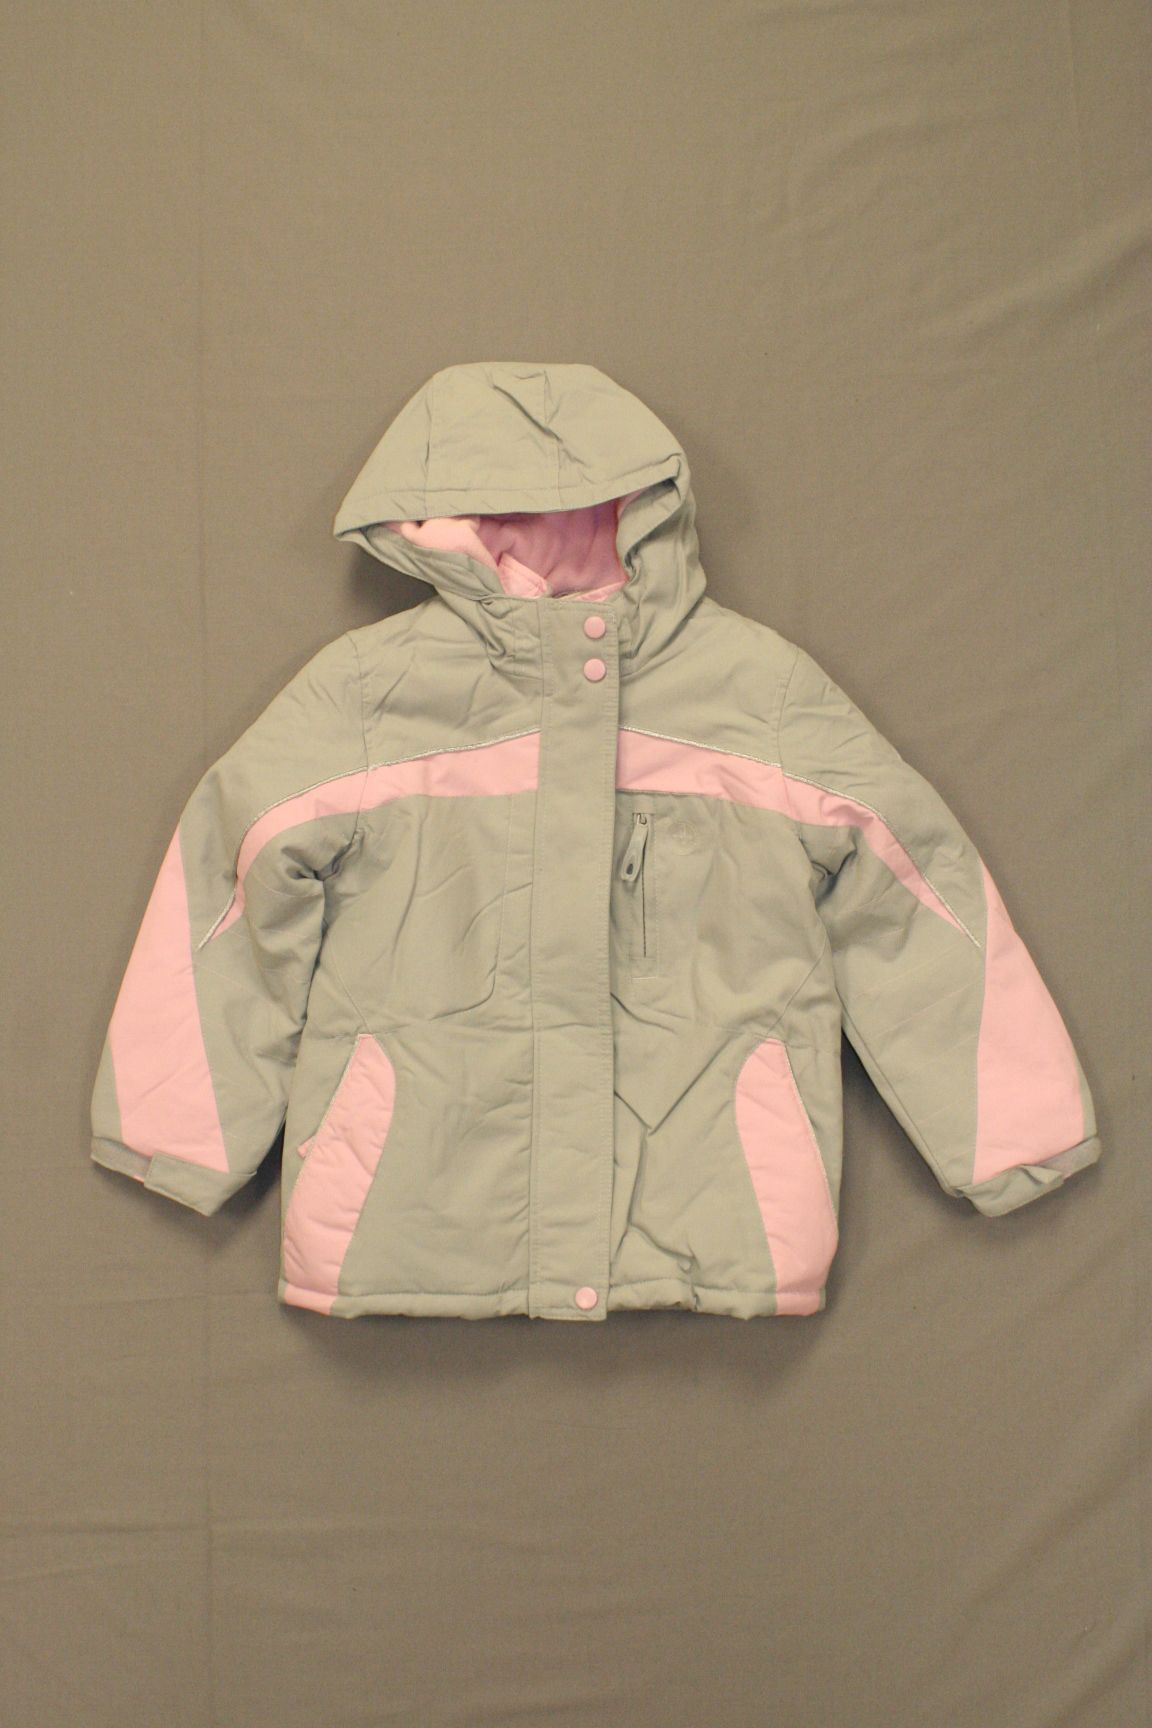 Athletech Girl's 4 in 1 Jacket